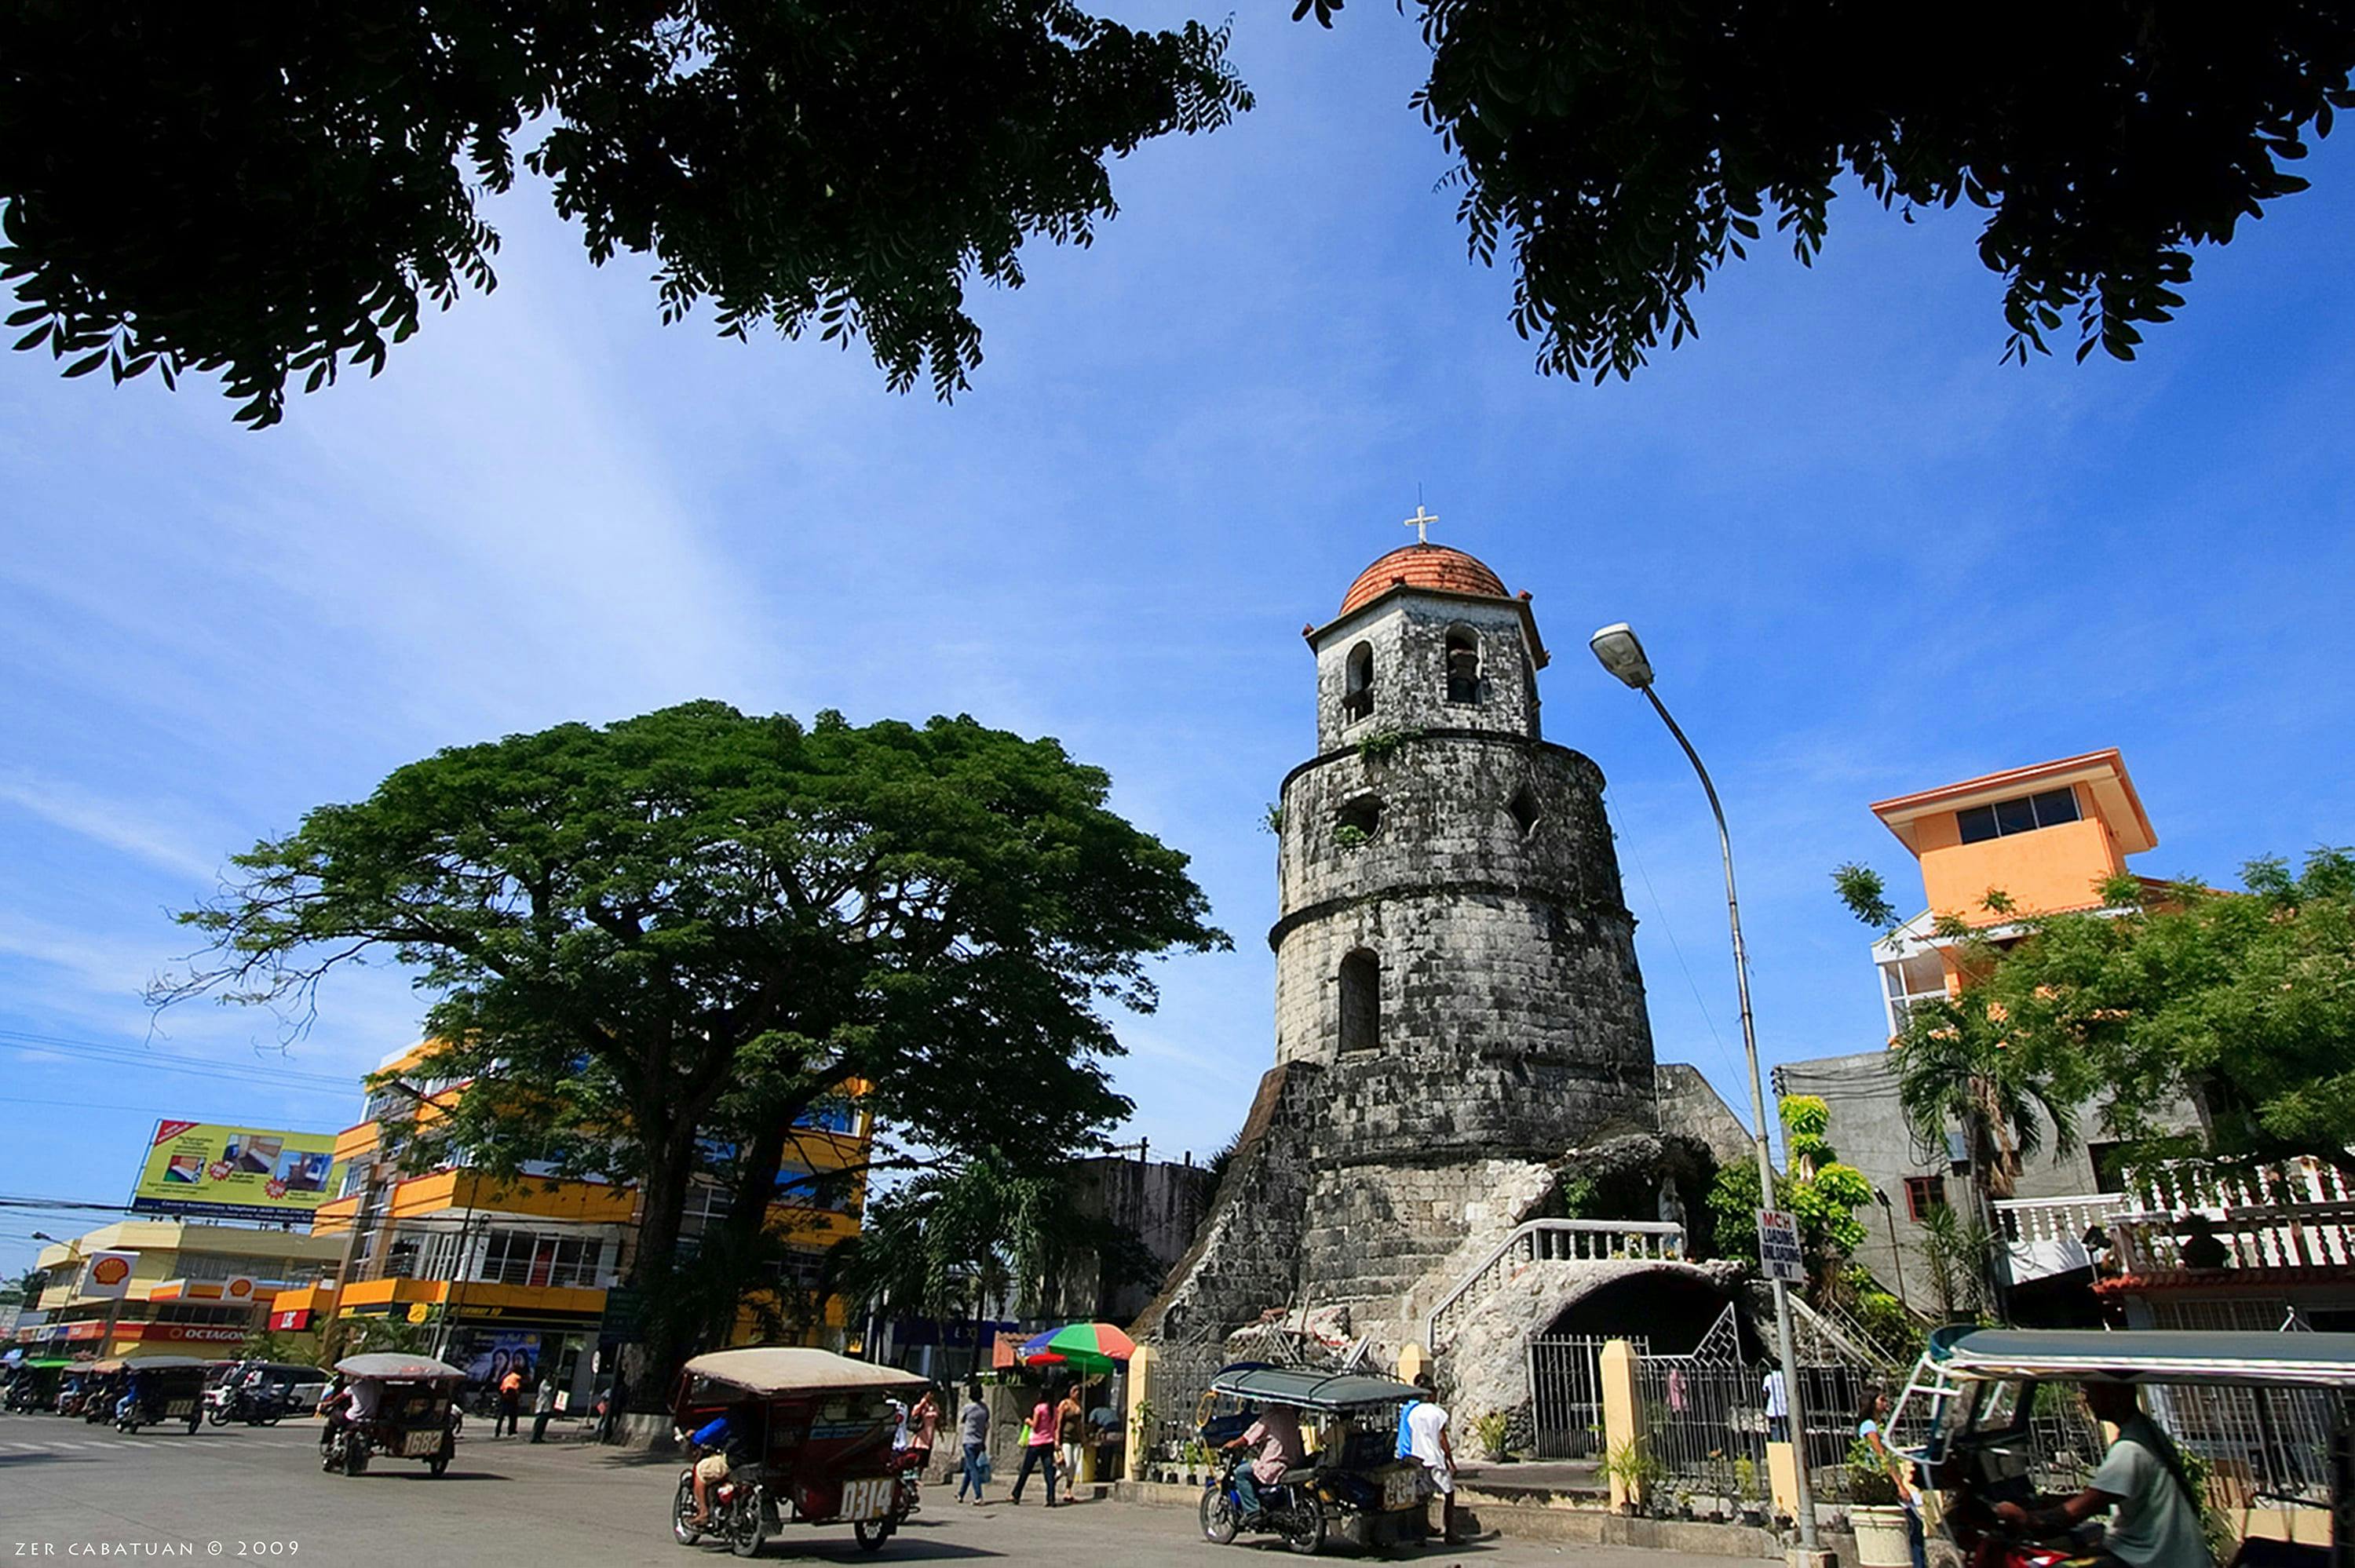 View of the Belfry Tower in Dumaguete